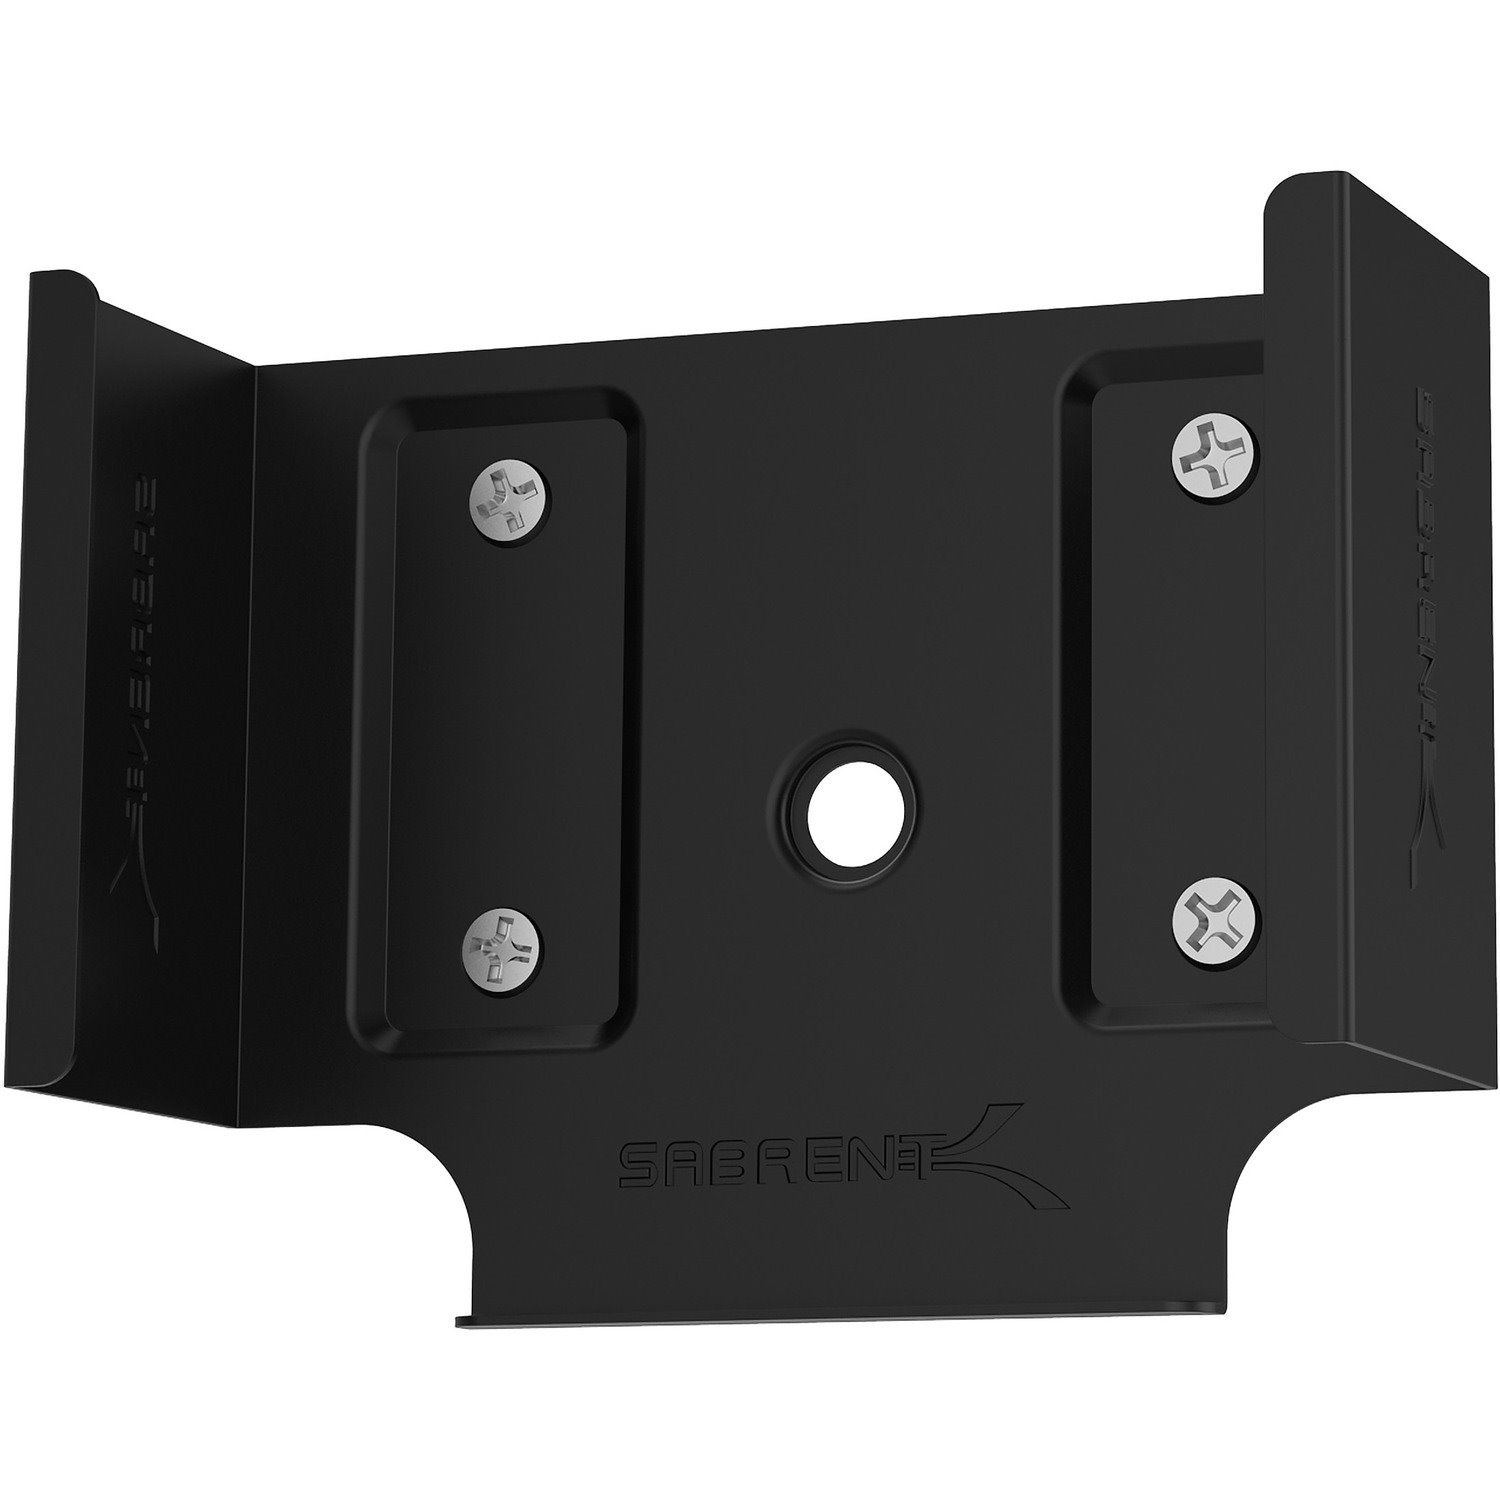 Sabrent Wall Mount for Apple TV, Monitor - Black